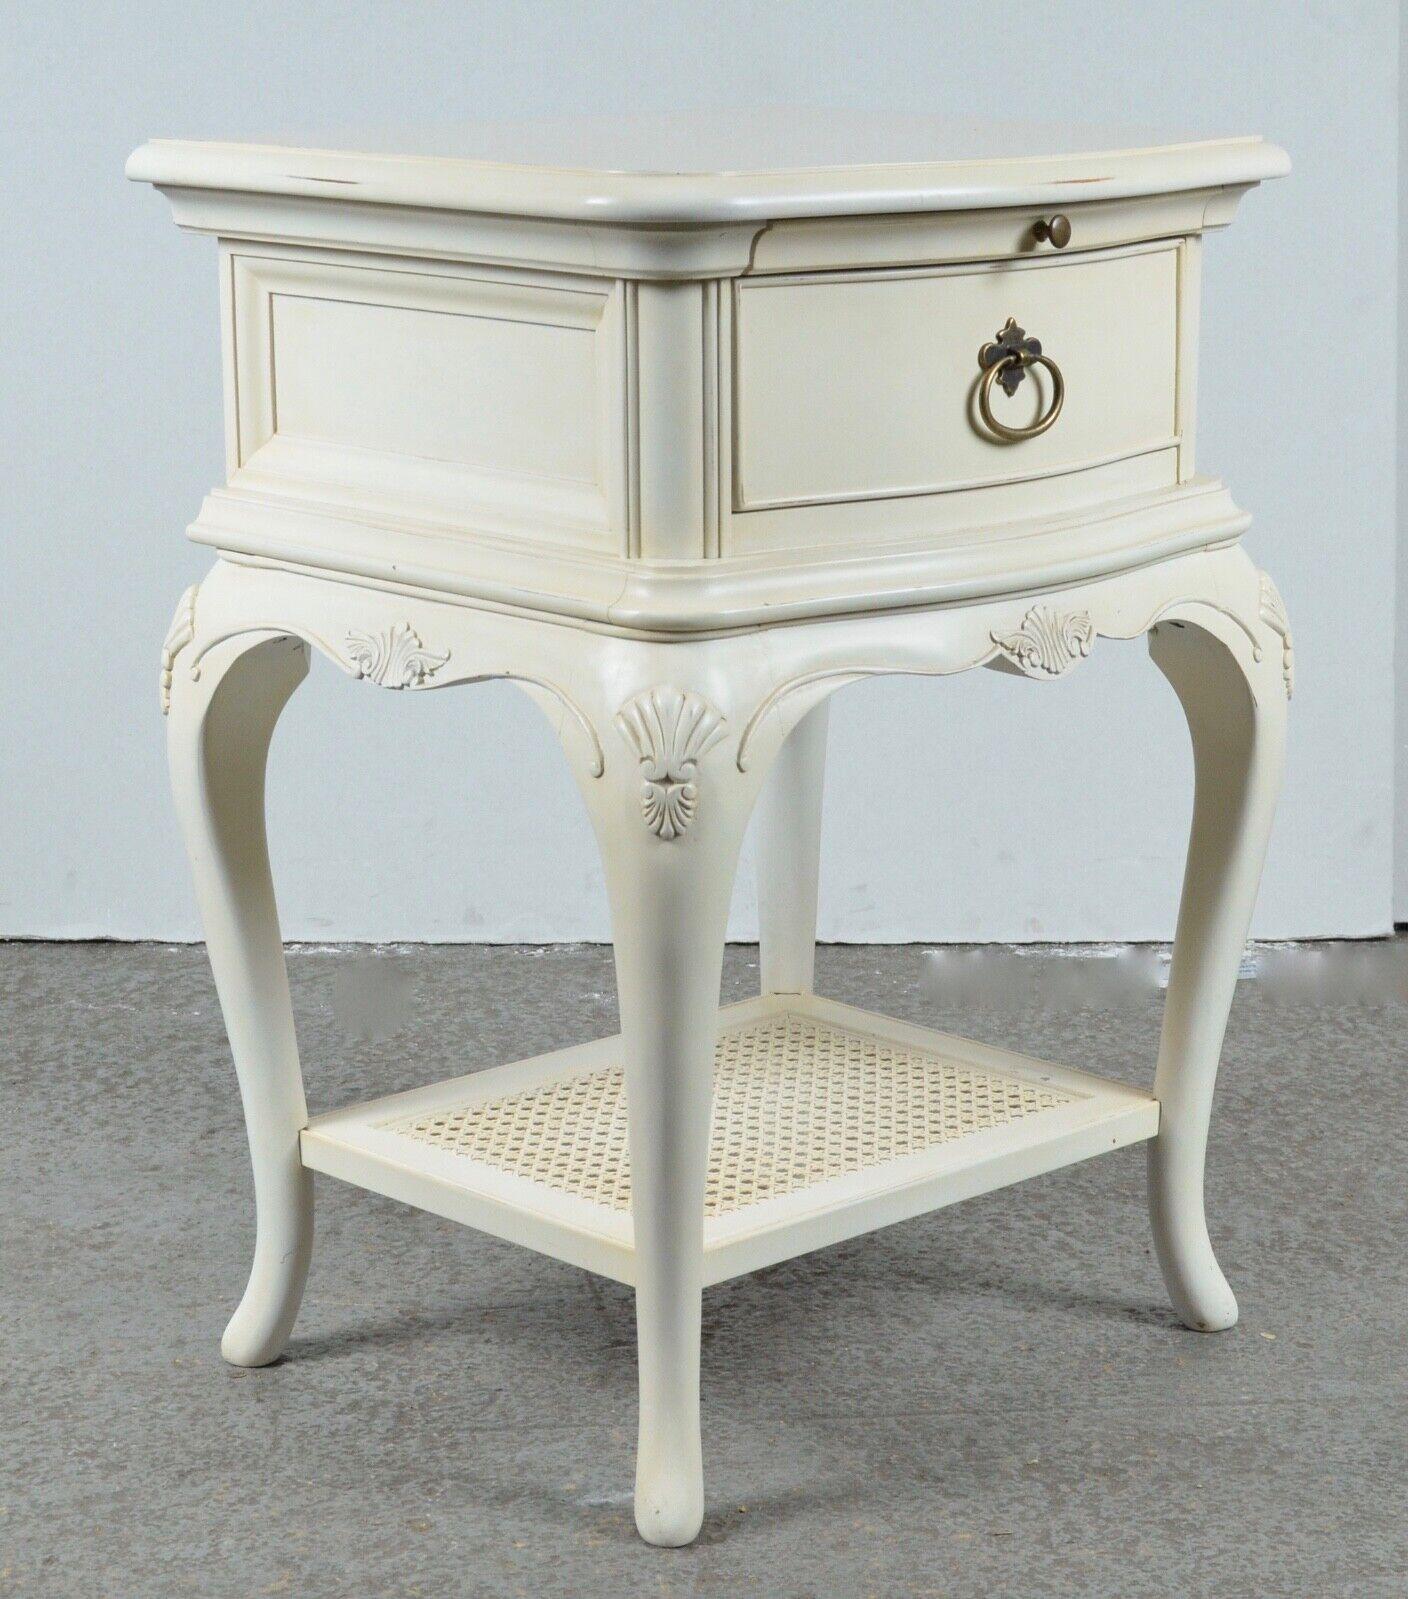 Country Rare paire de tables basses WILLIS & GAMBIER IVORY SINGLE DRAWER BEDSiDE NIGHTSTANDS  en vente